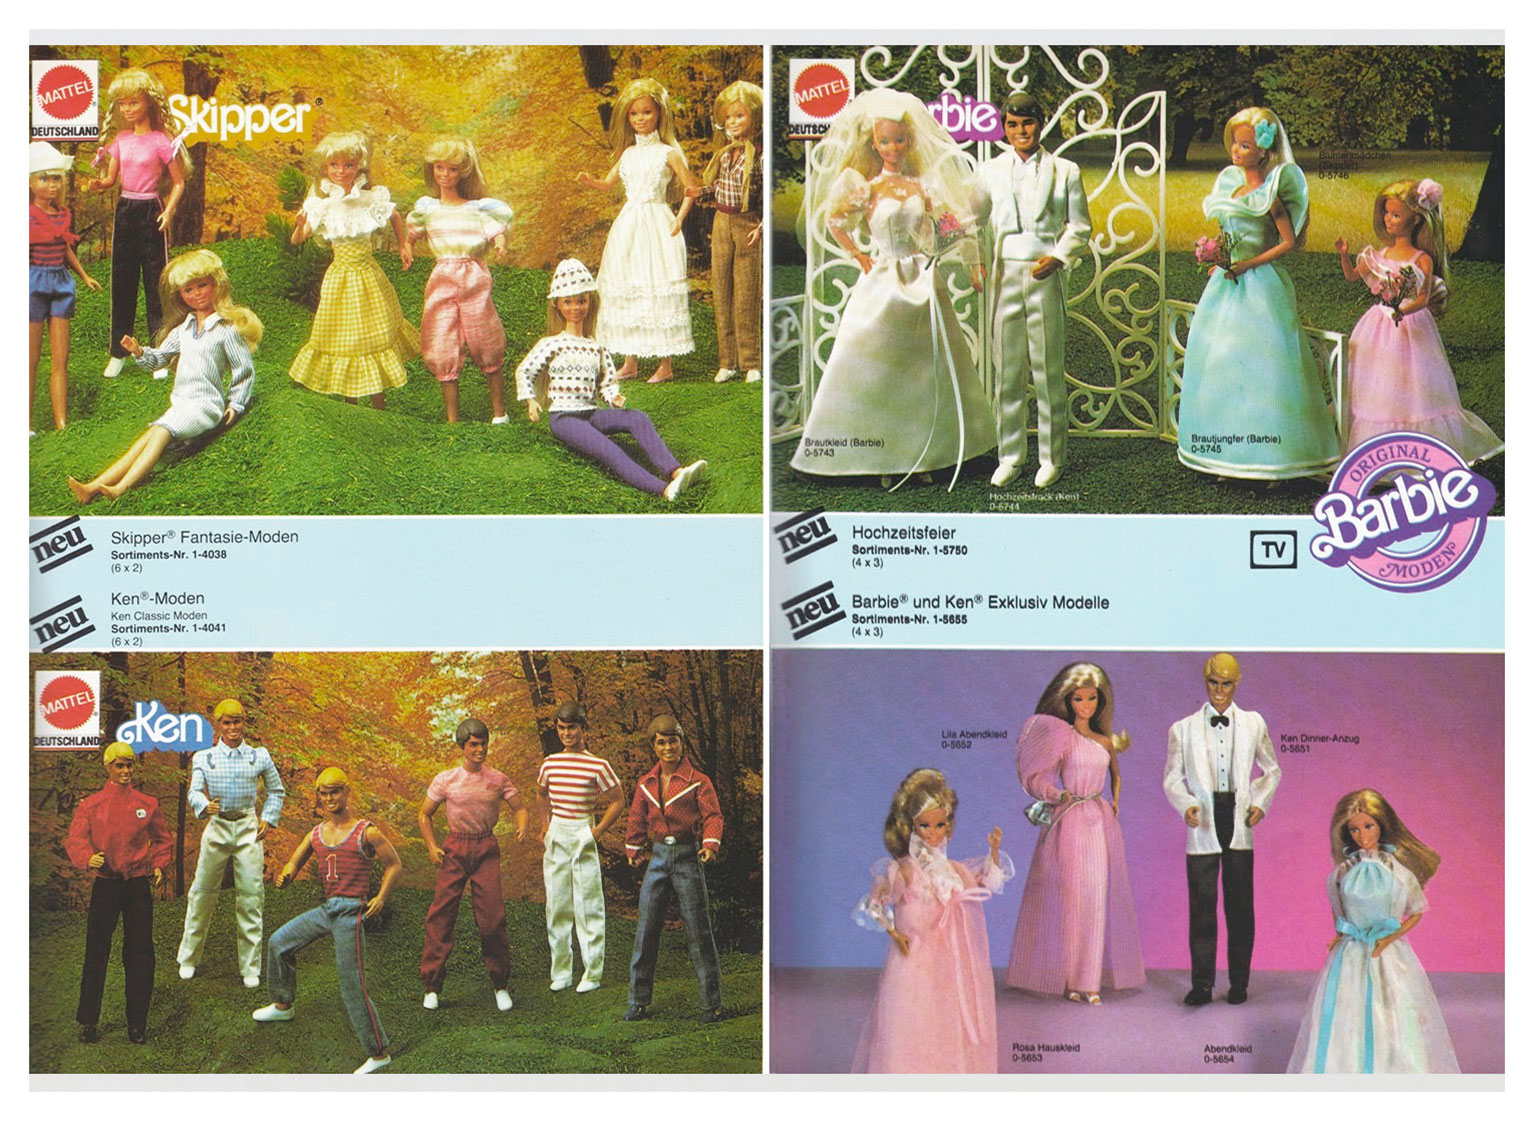 From 1983 German Mattel Toys catalogue